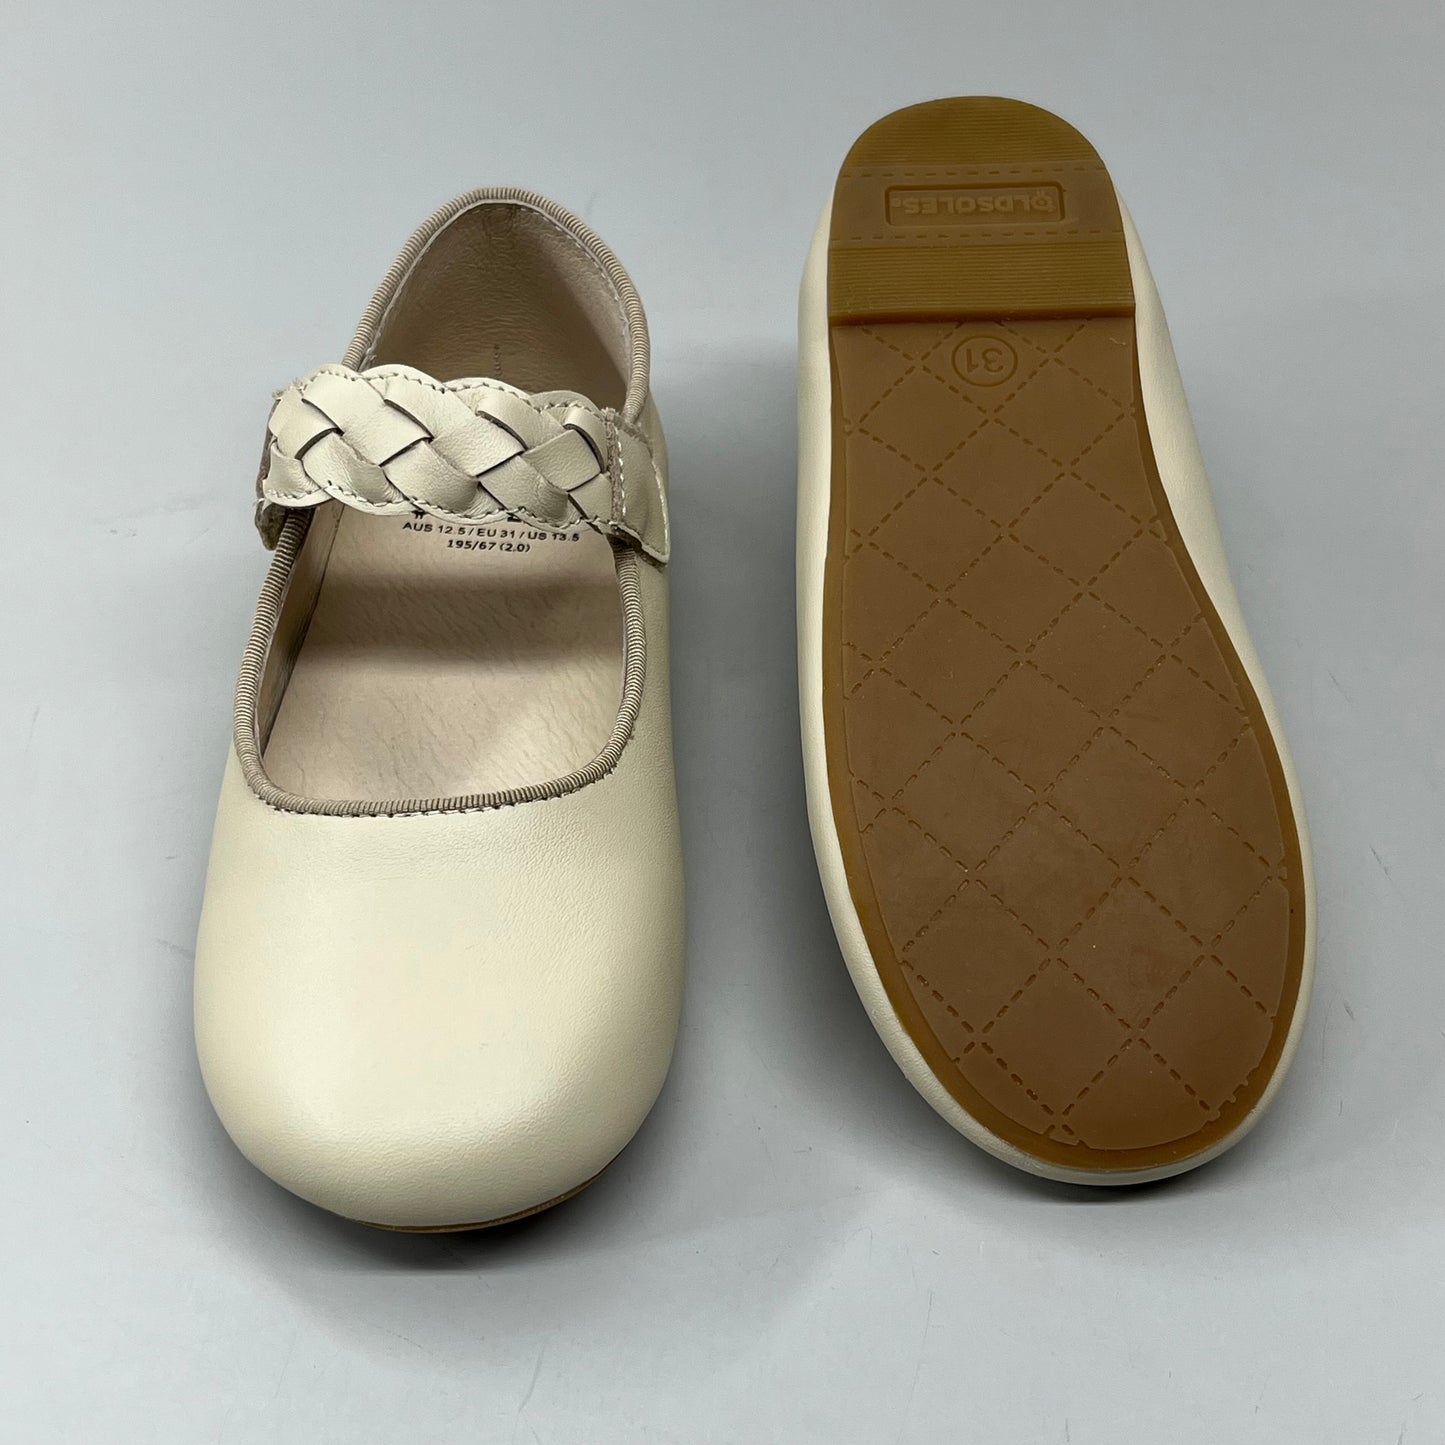 OLD SOLES Lady Plat Braided Strap Leather Shoe Kid’s Sz 33 US 1.5 Cream #817